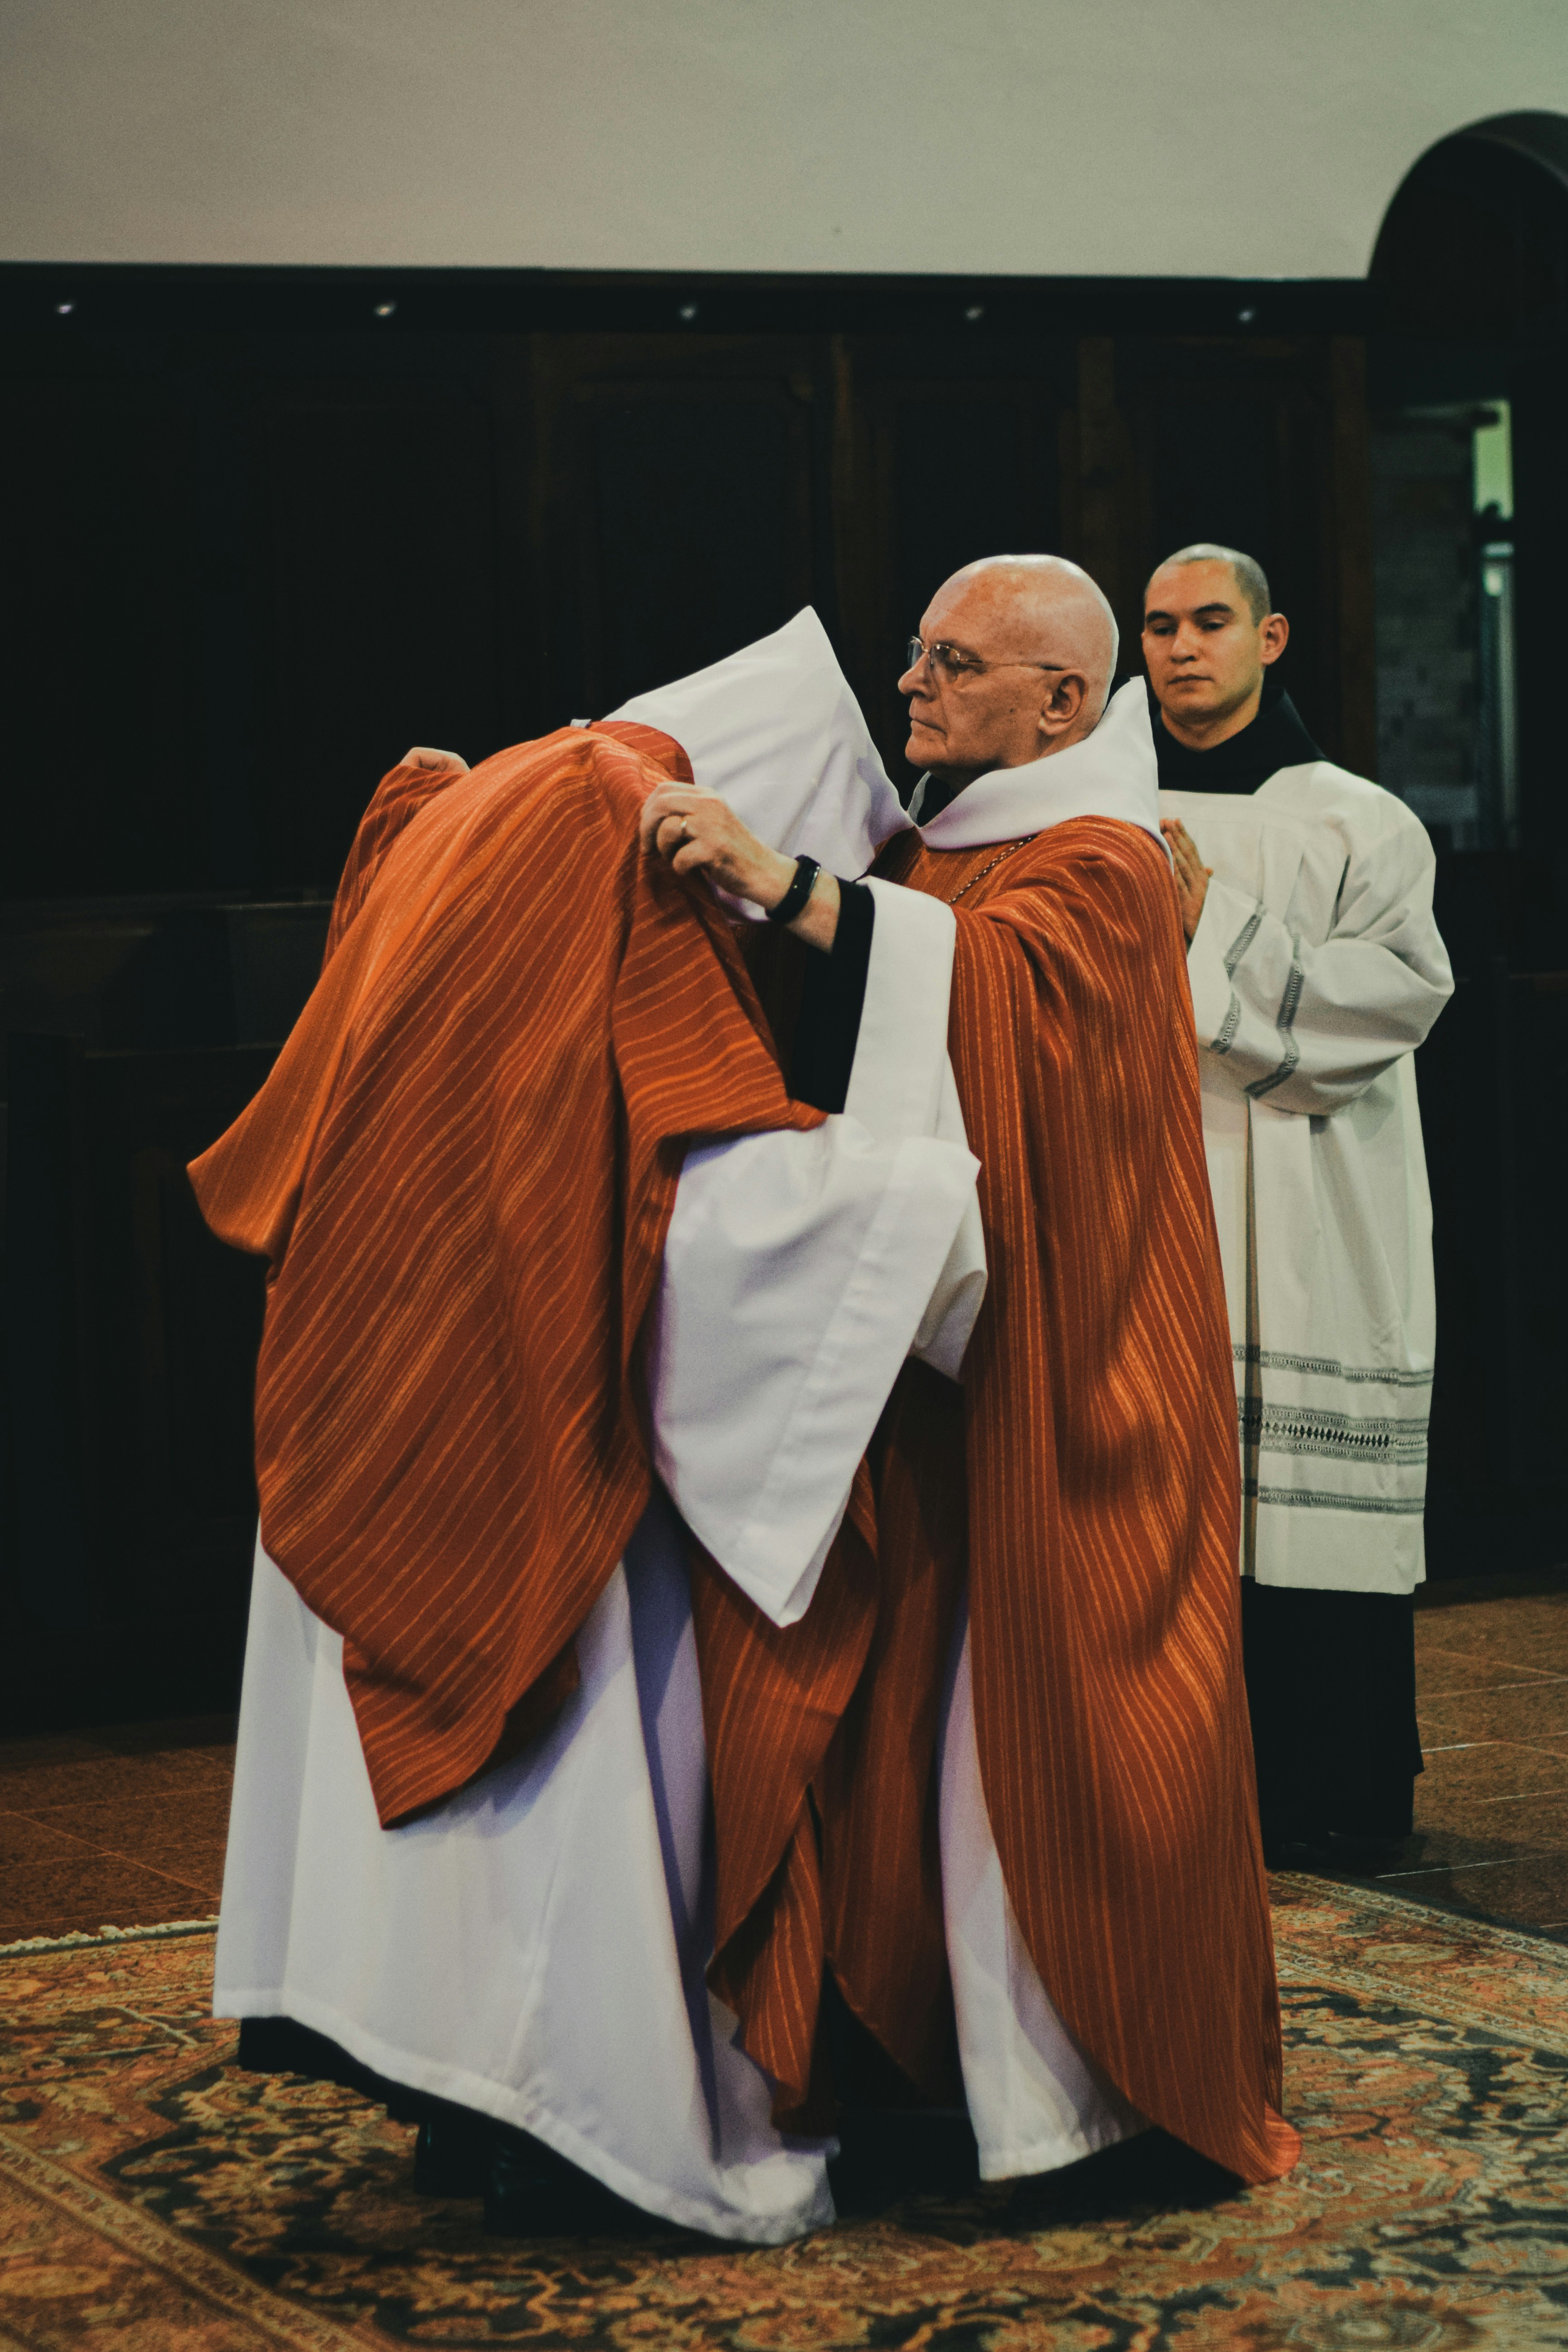 two priests in brown and white robes